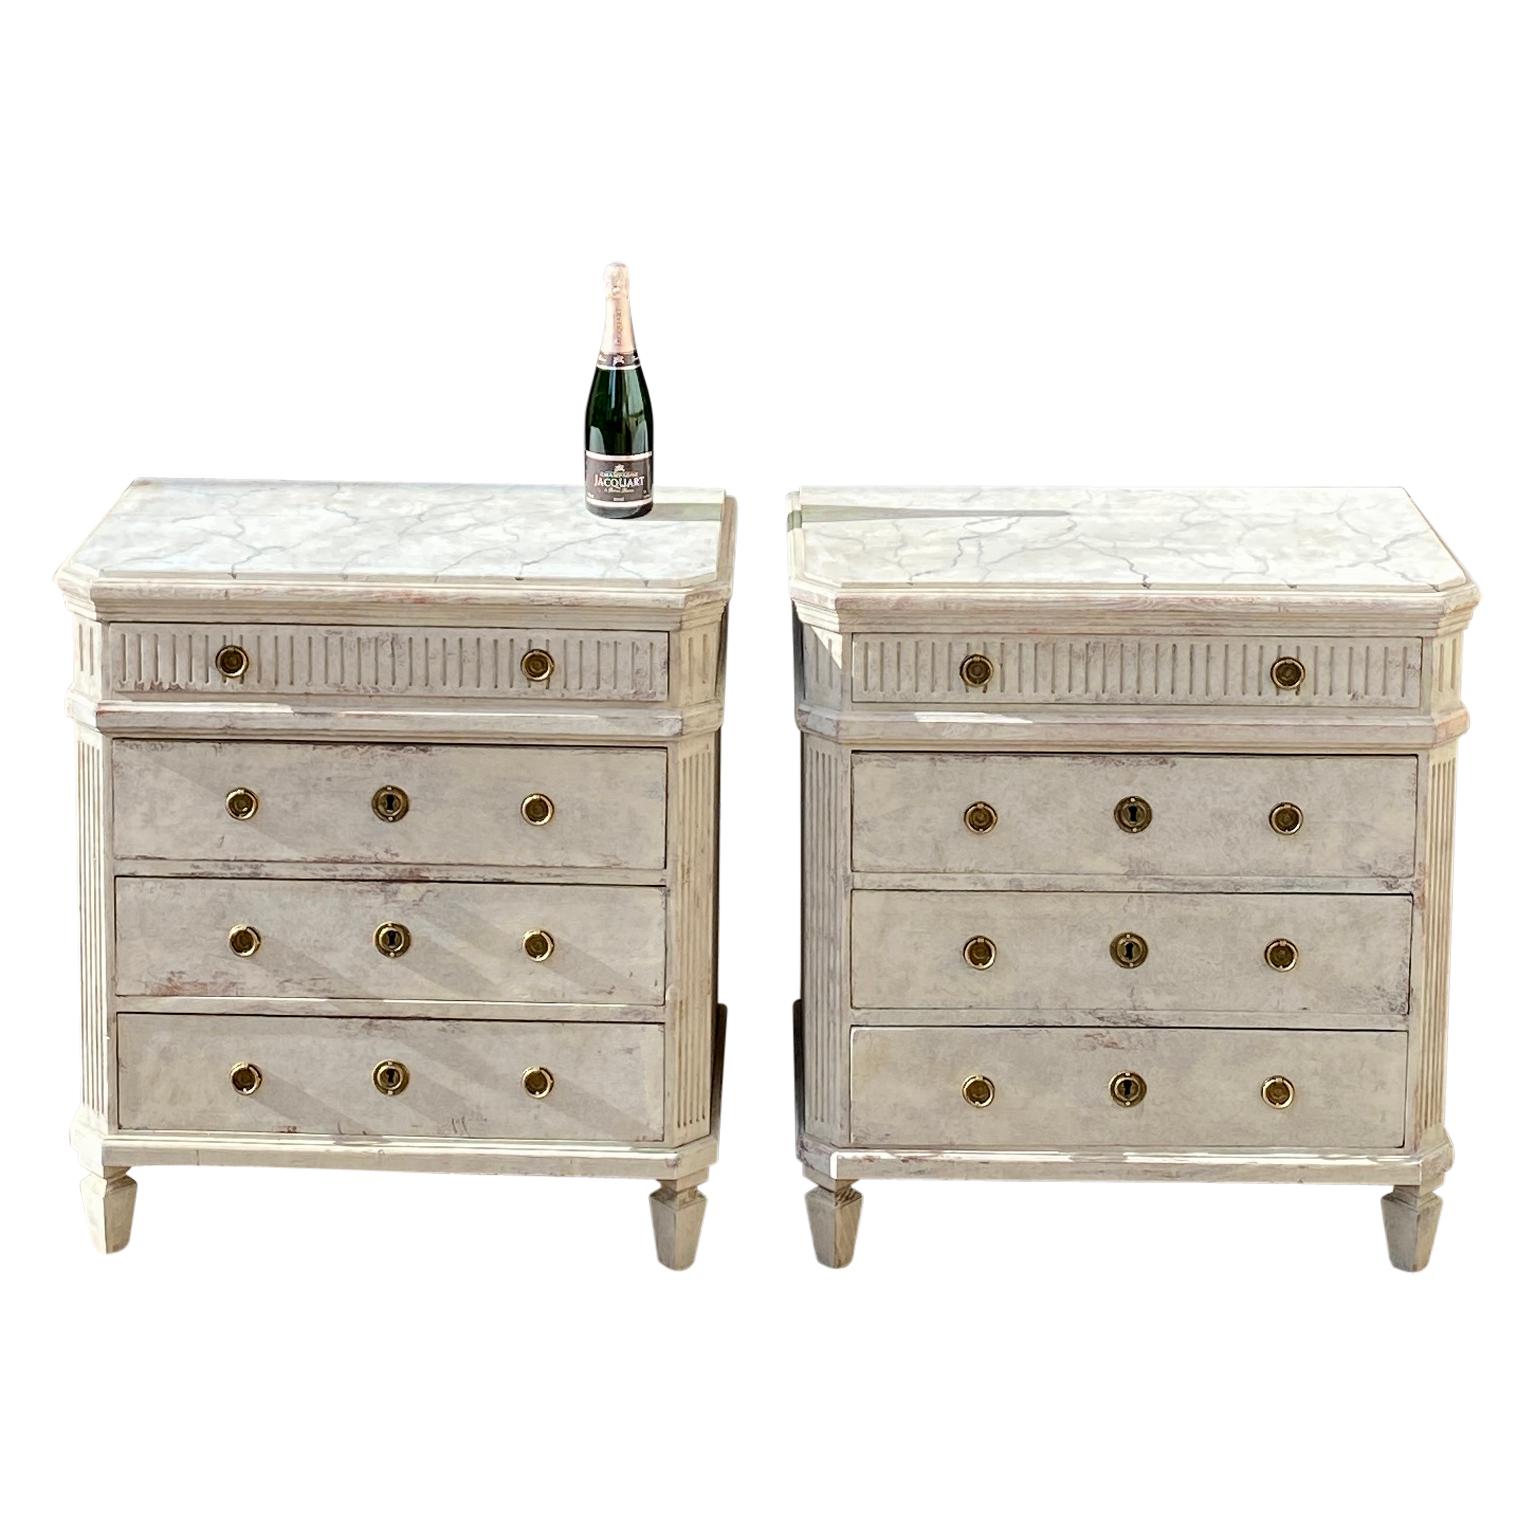 Pair Of Light Grey Gustavian Chest of Drawers With 3 Drawer Dressers, Brass Hardware and with Faux Marble Tops.